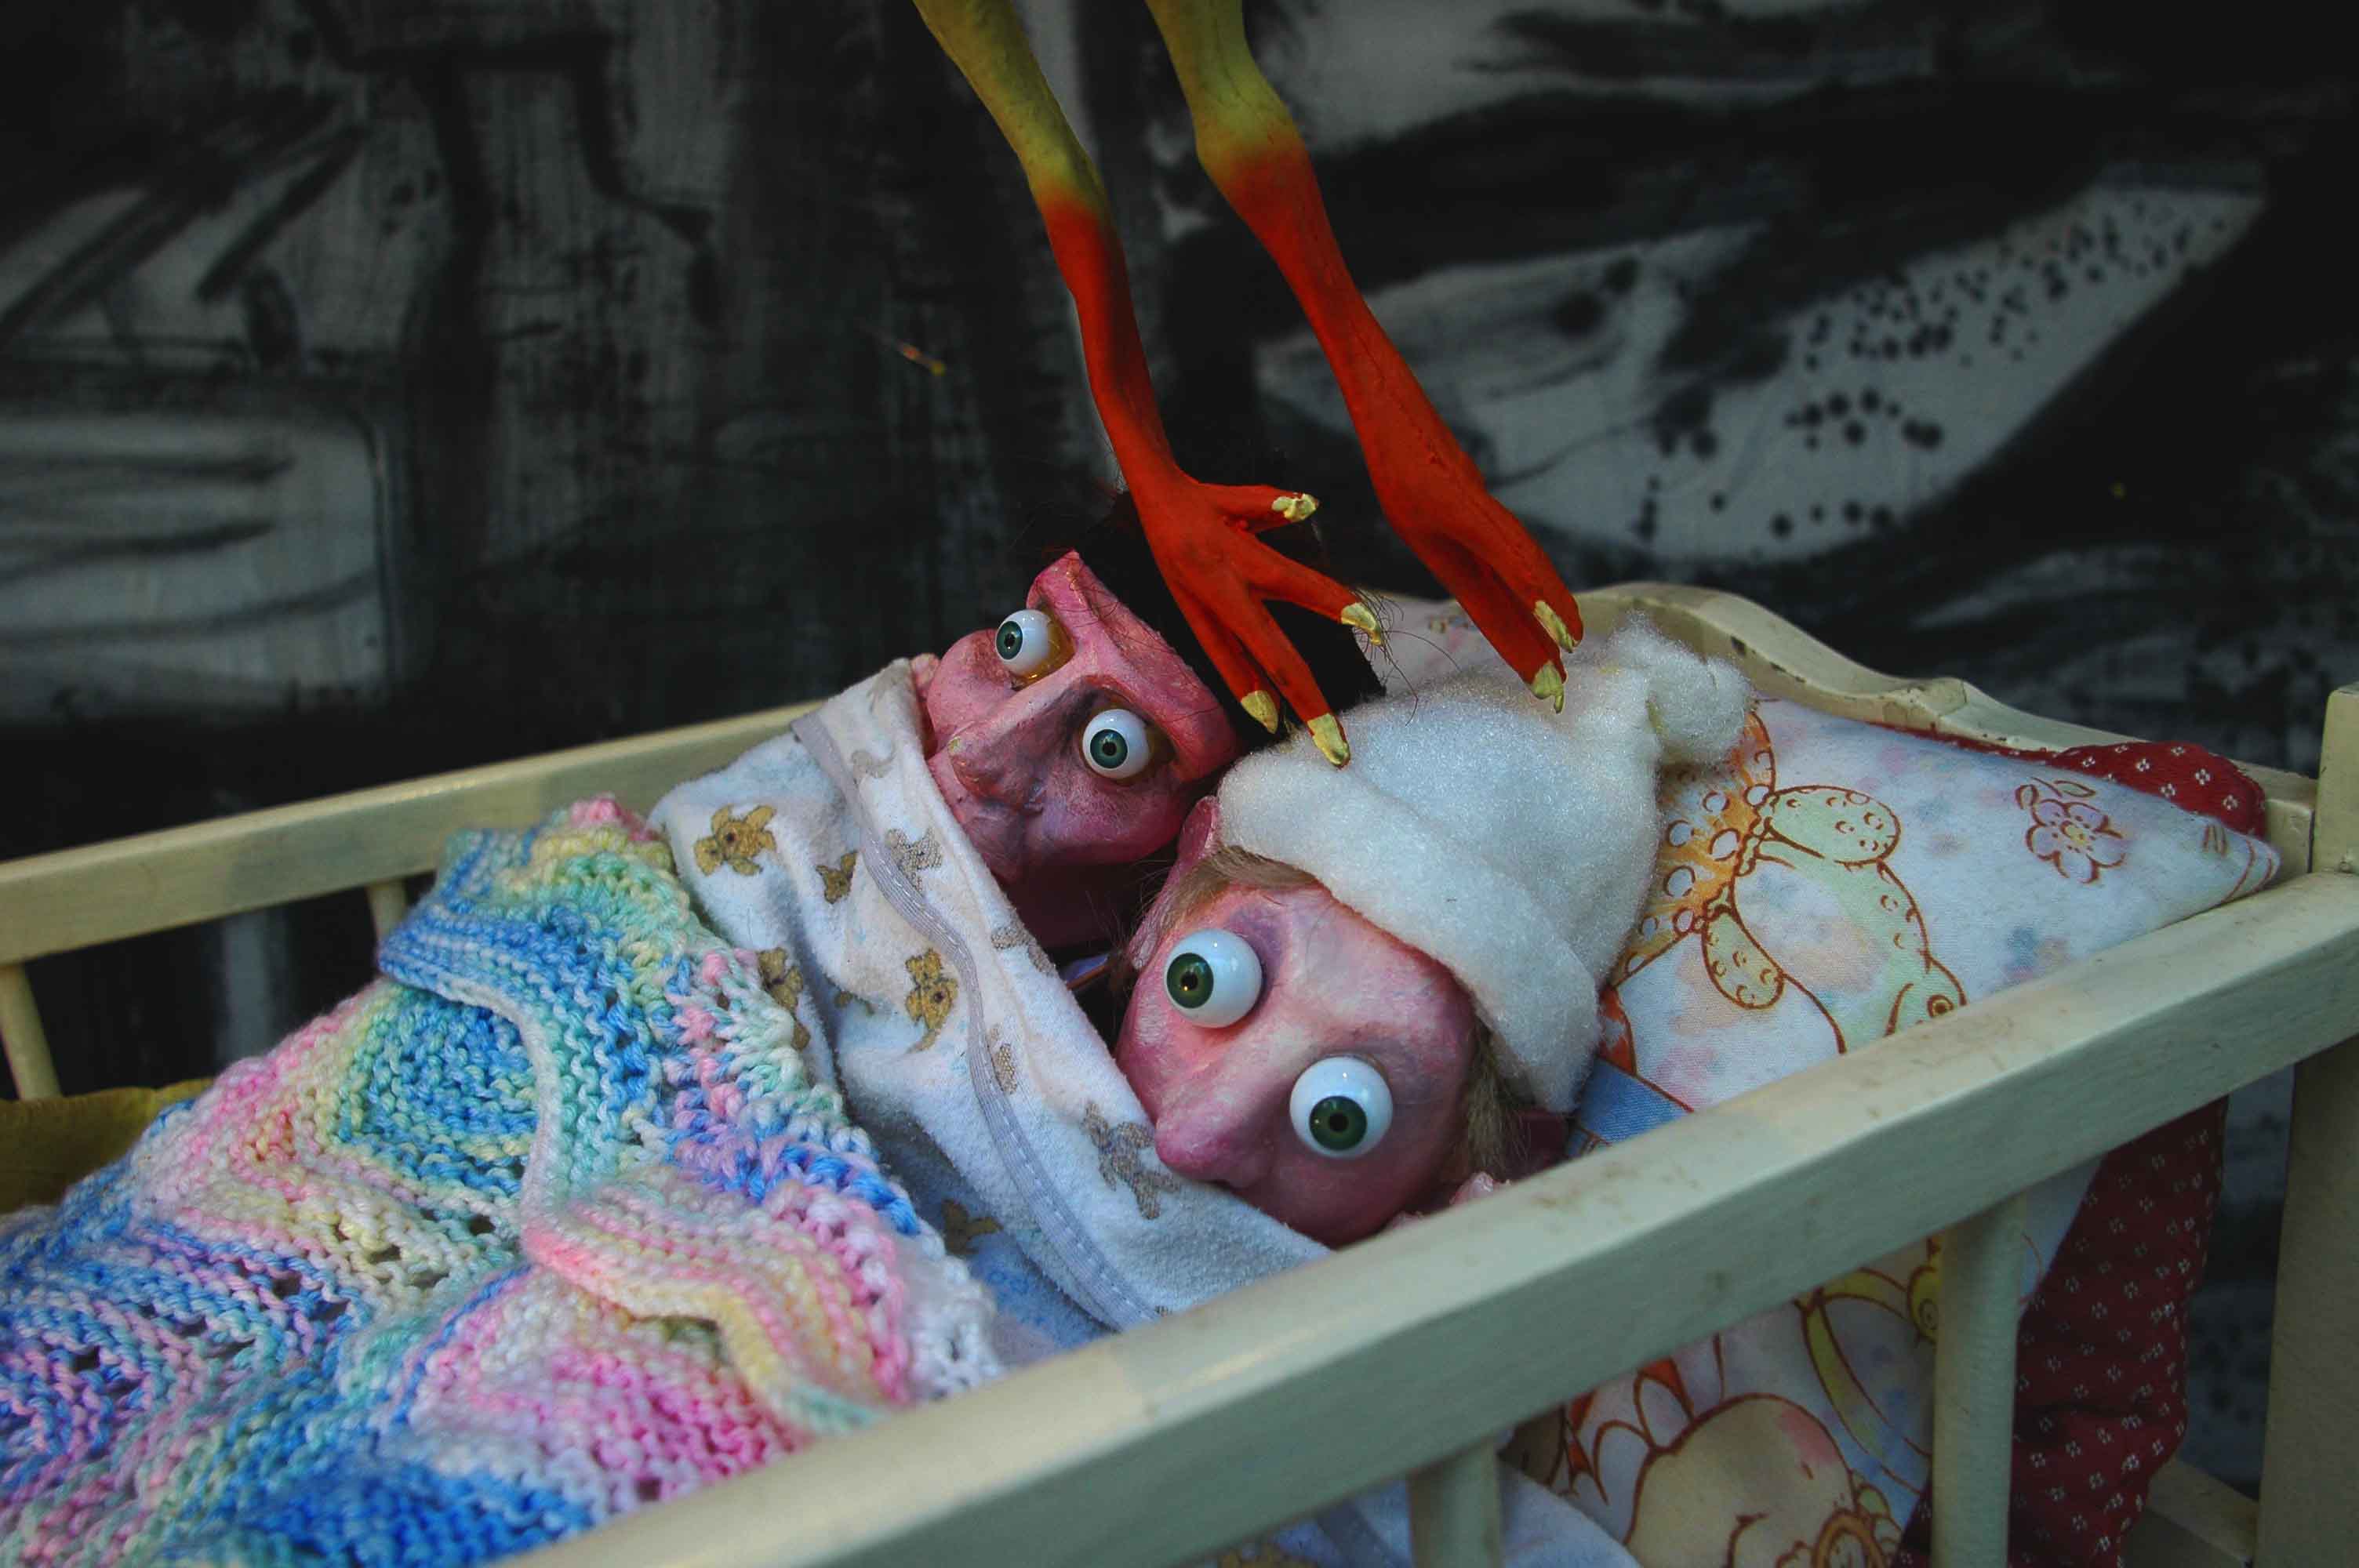 Puppets by Xstine Cook for the film